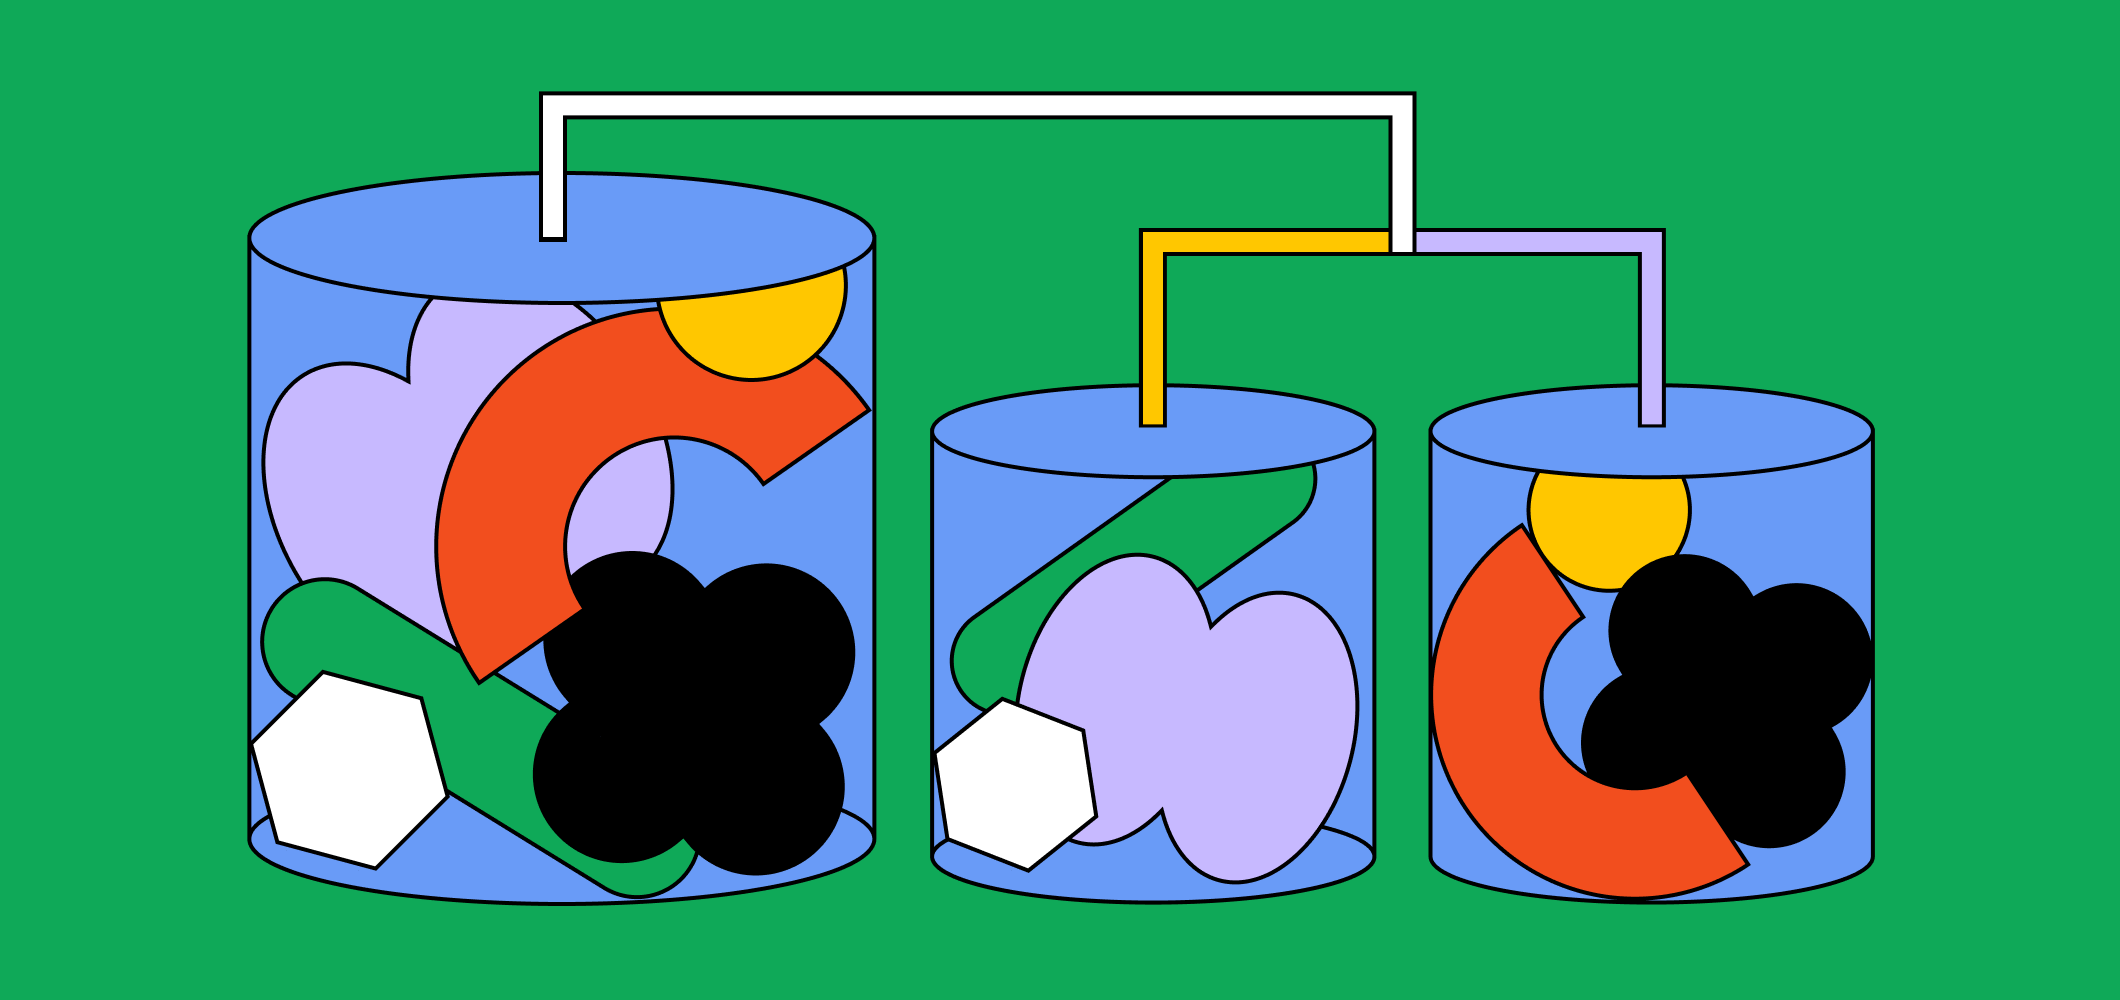 Three data silos, with objects in each of them, connect to each other.